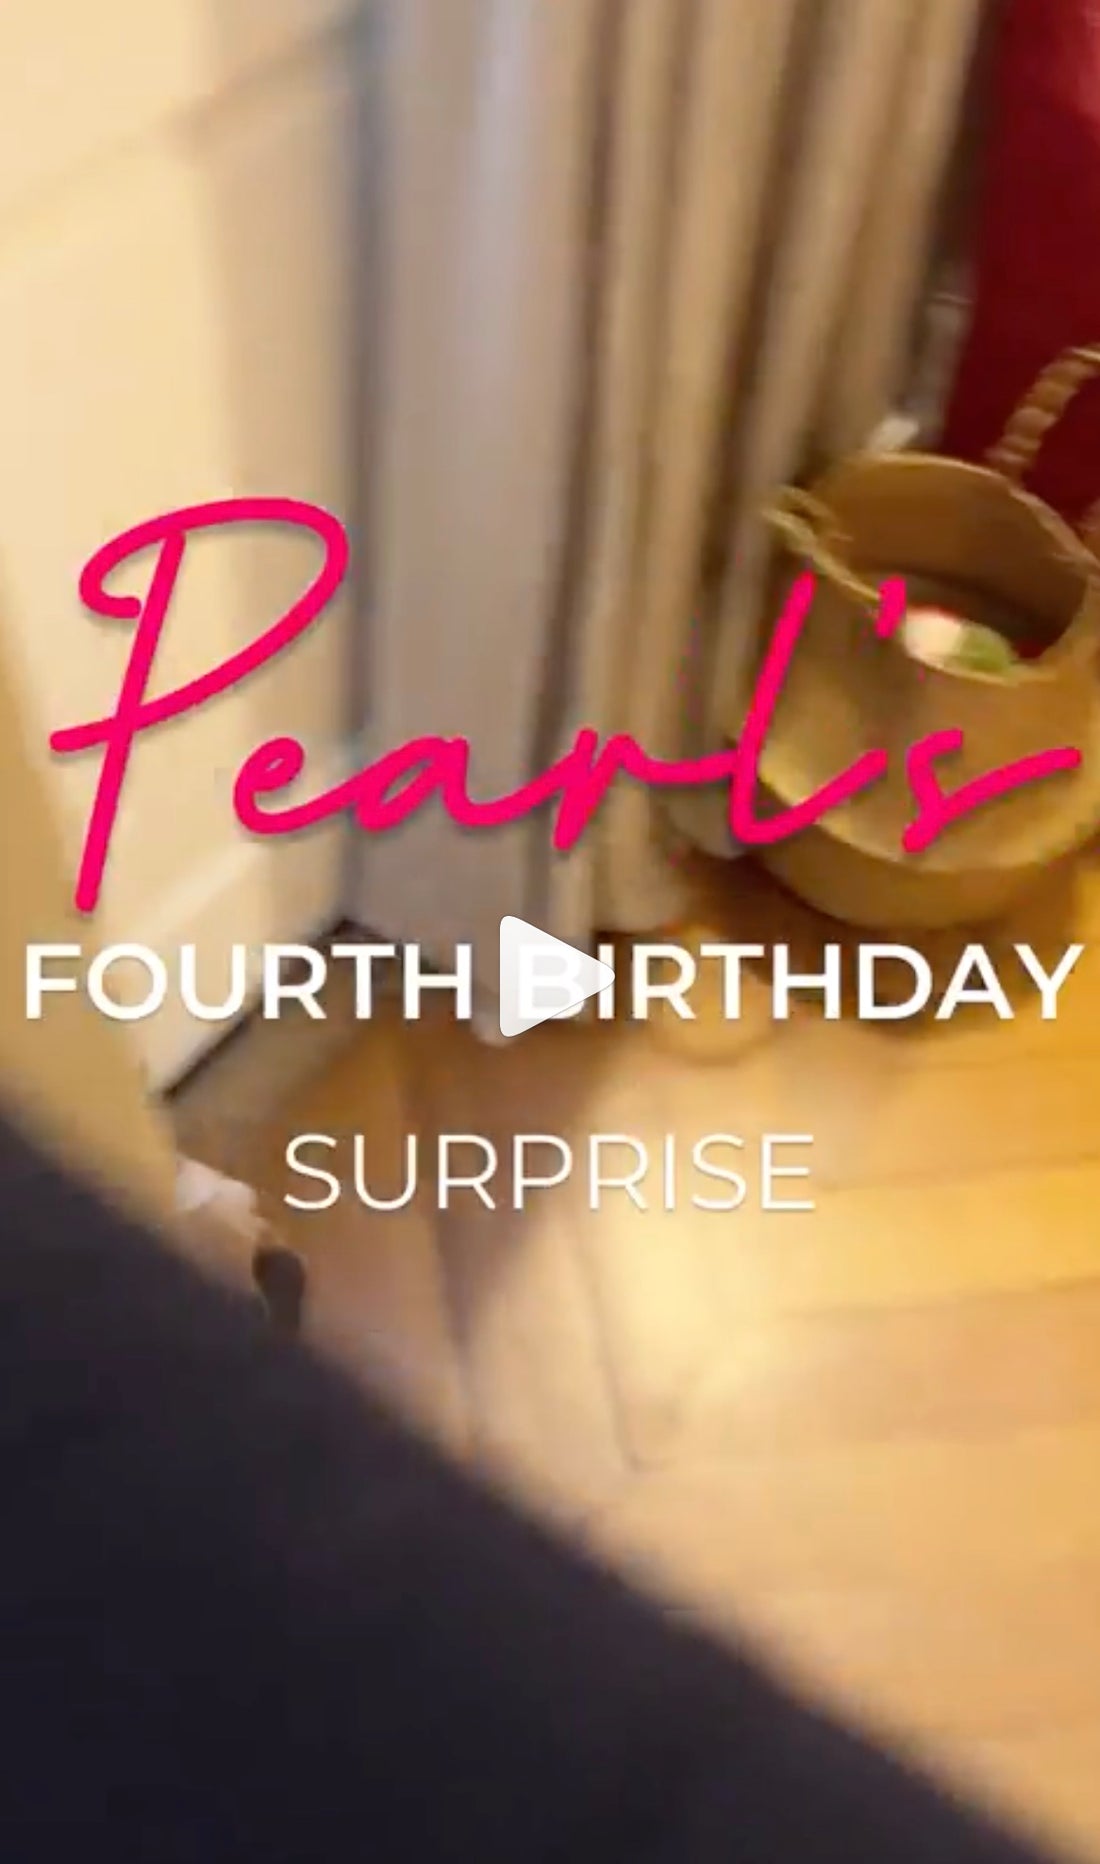 Pearl’s Fourth Birthday Surprise - A balloon fest!